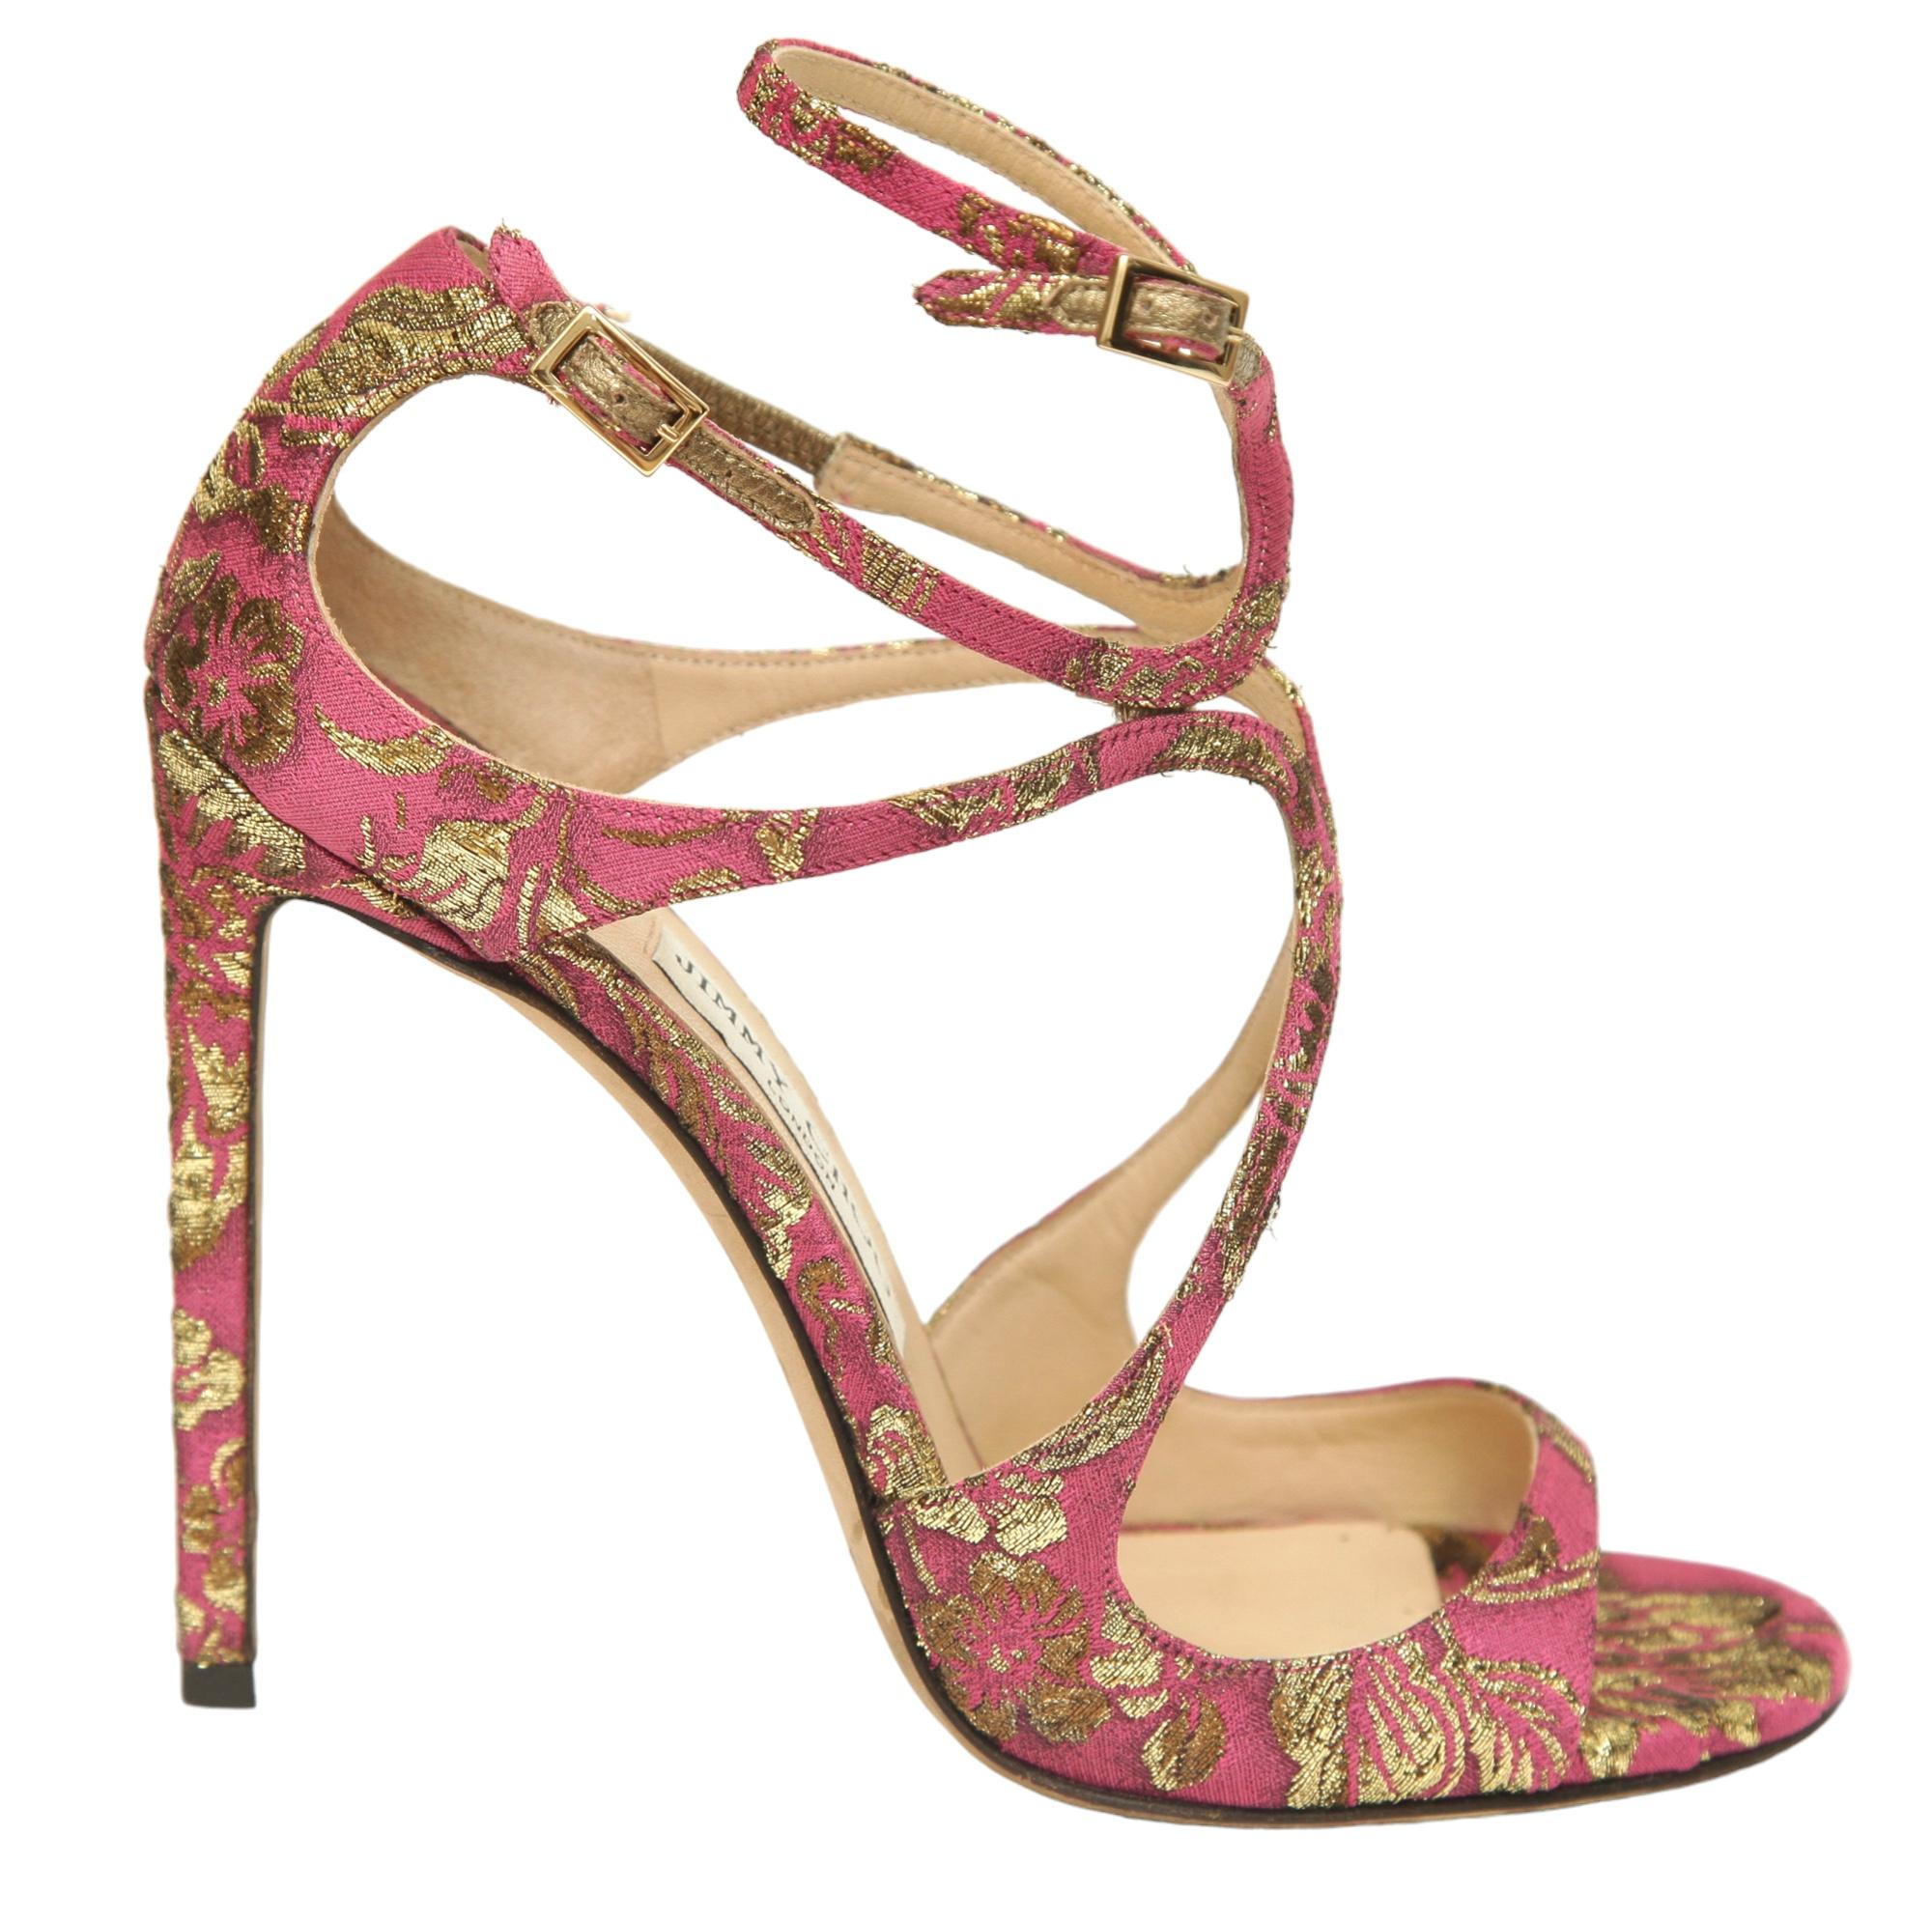 Women's JIMMY CHOO Sandals Brocade Pink Gold Metallic LANCER Heels Leather Strappy 38 For Sale